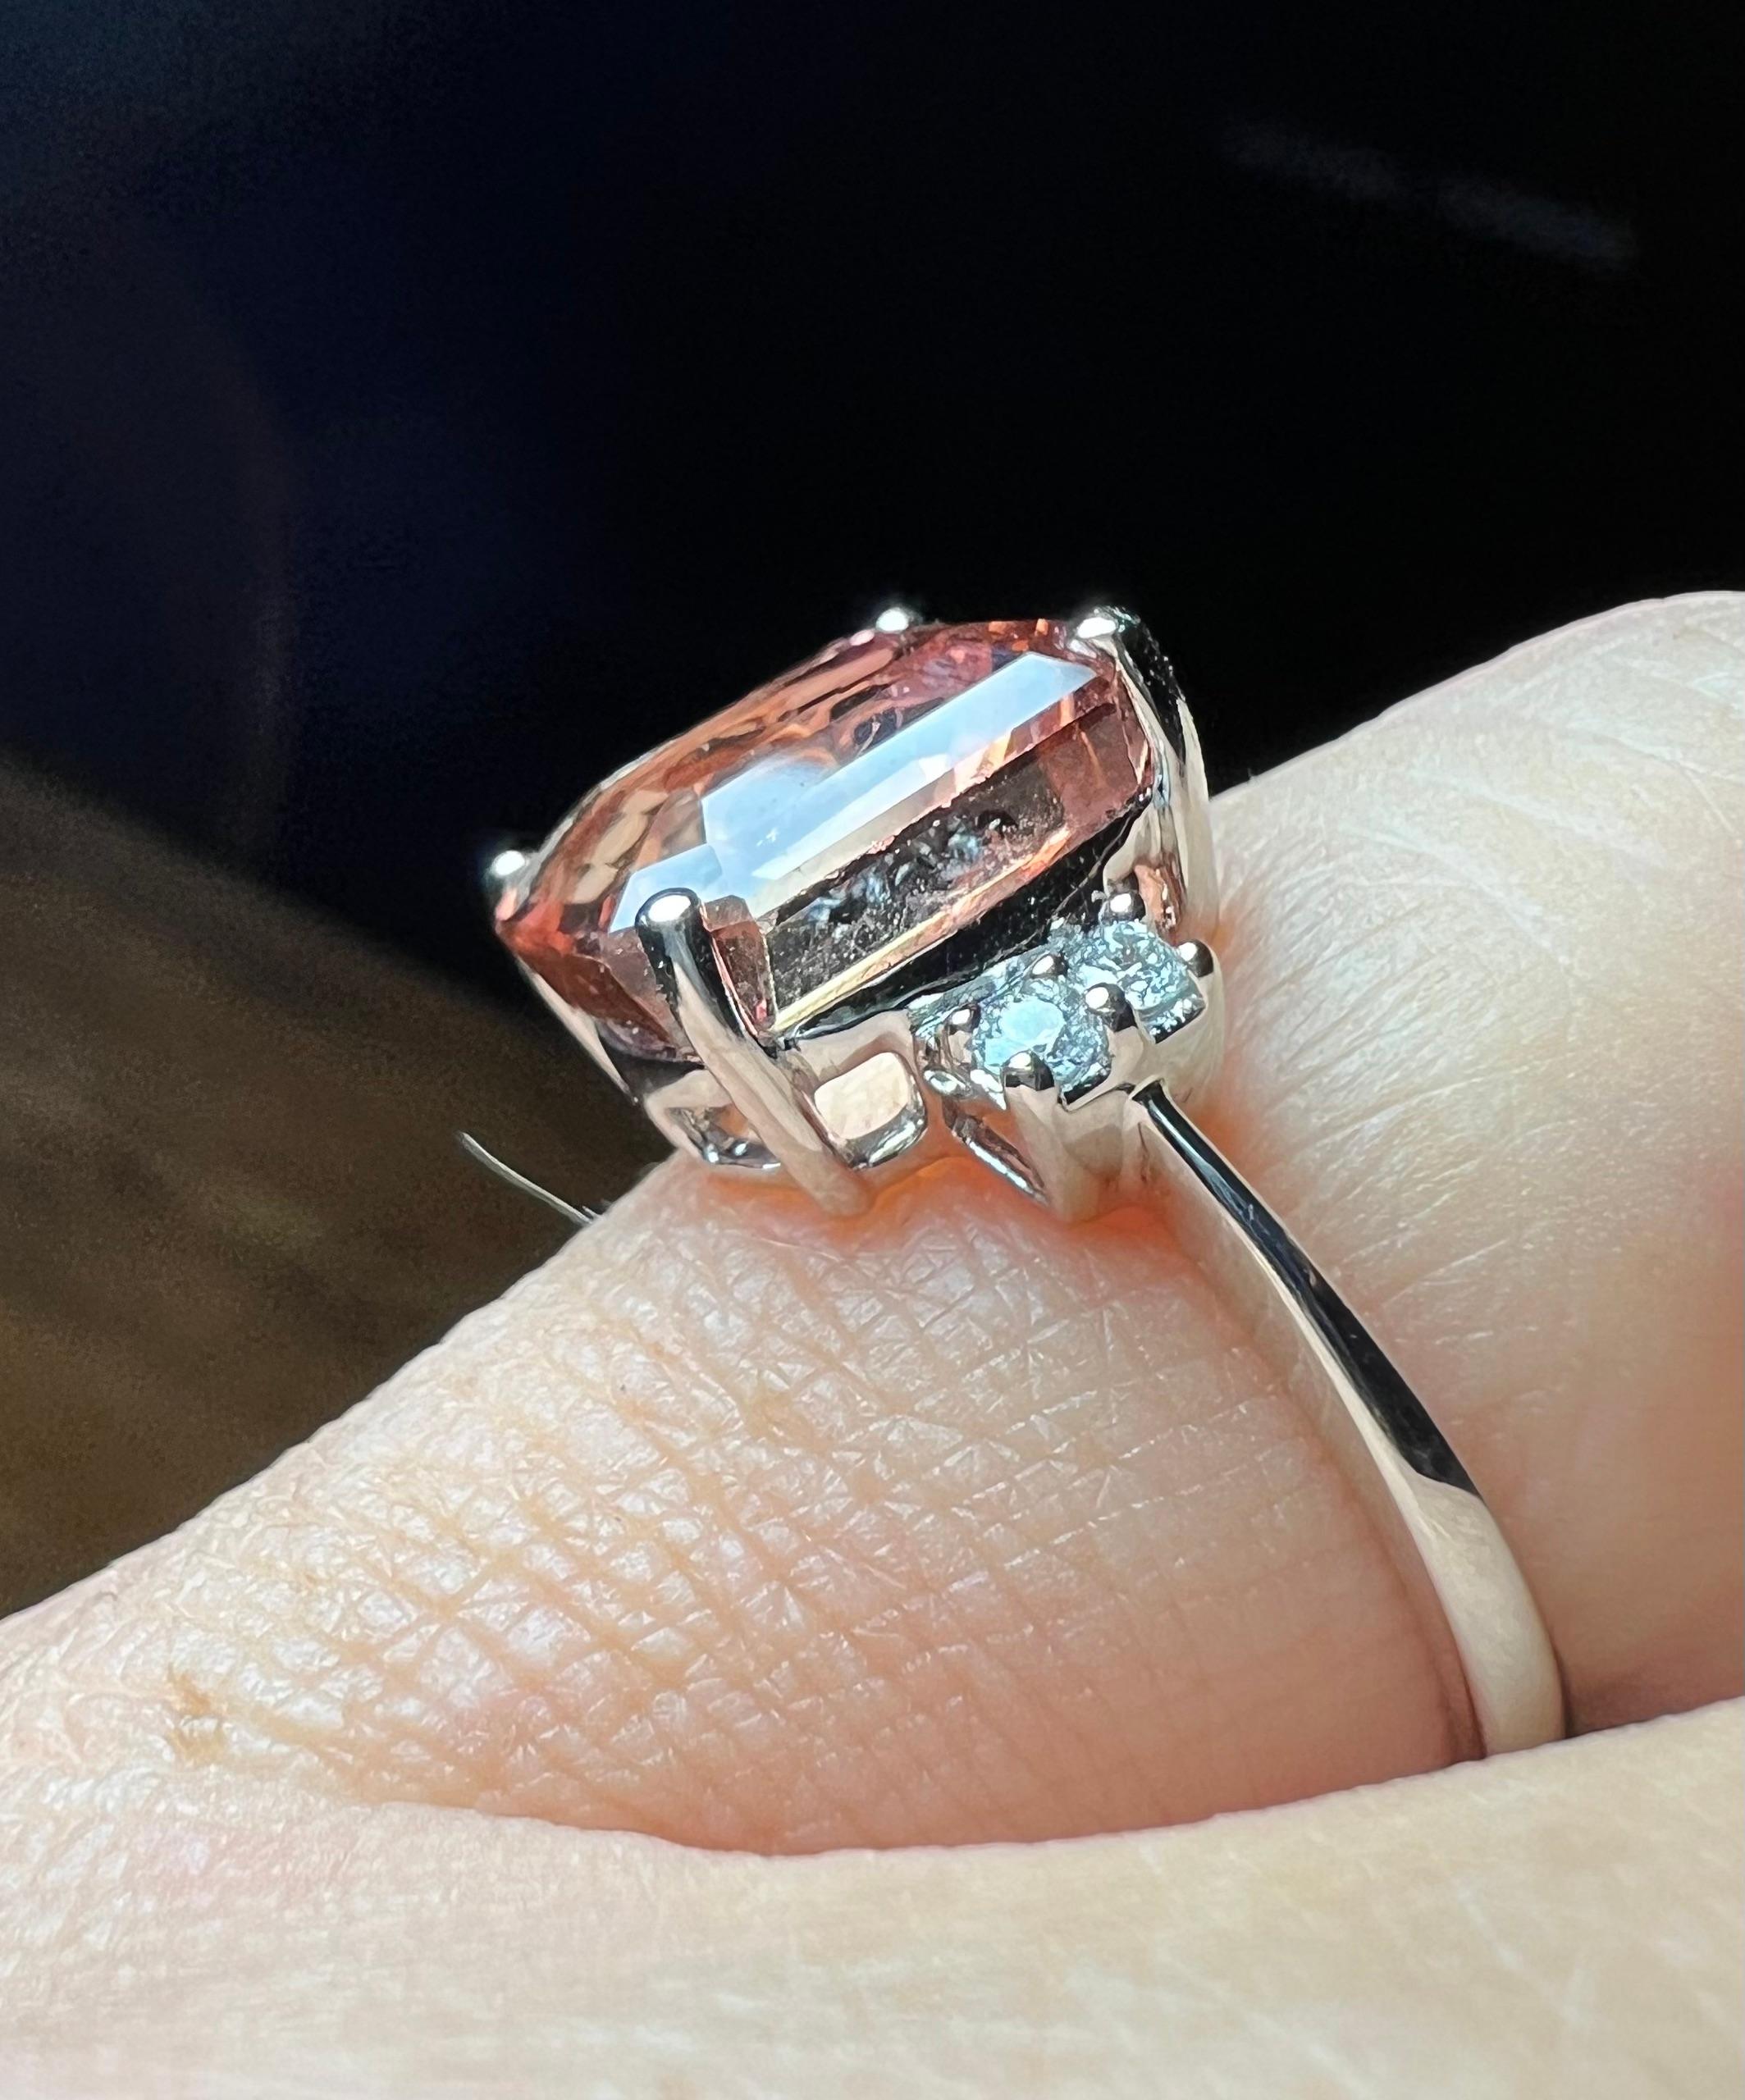 very pretty tourmaline in an orange-pink tone surrounded by brilliants on an 18-carat white gold ring body
total weight of tourmaline: 4.64 carat
paving weight: 0.10 carat
total weight of the ring: 3.74 grams
size:52
resizing offered